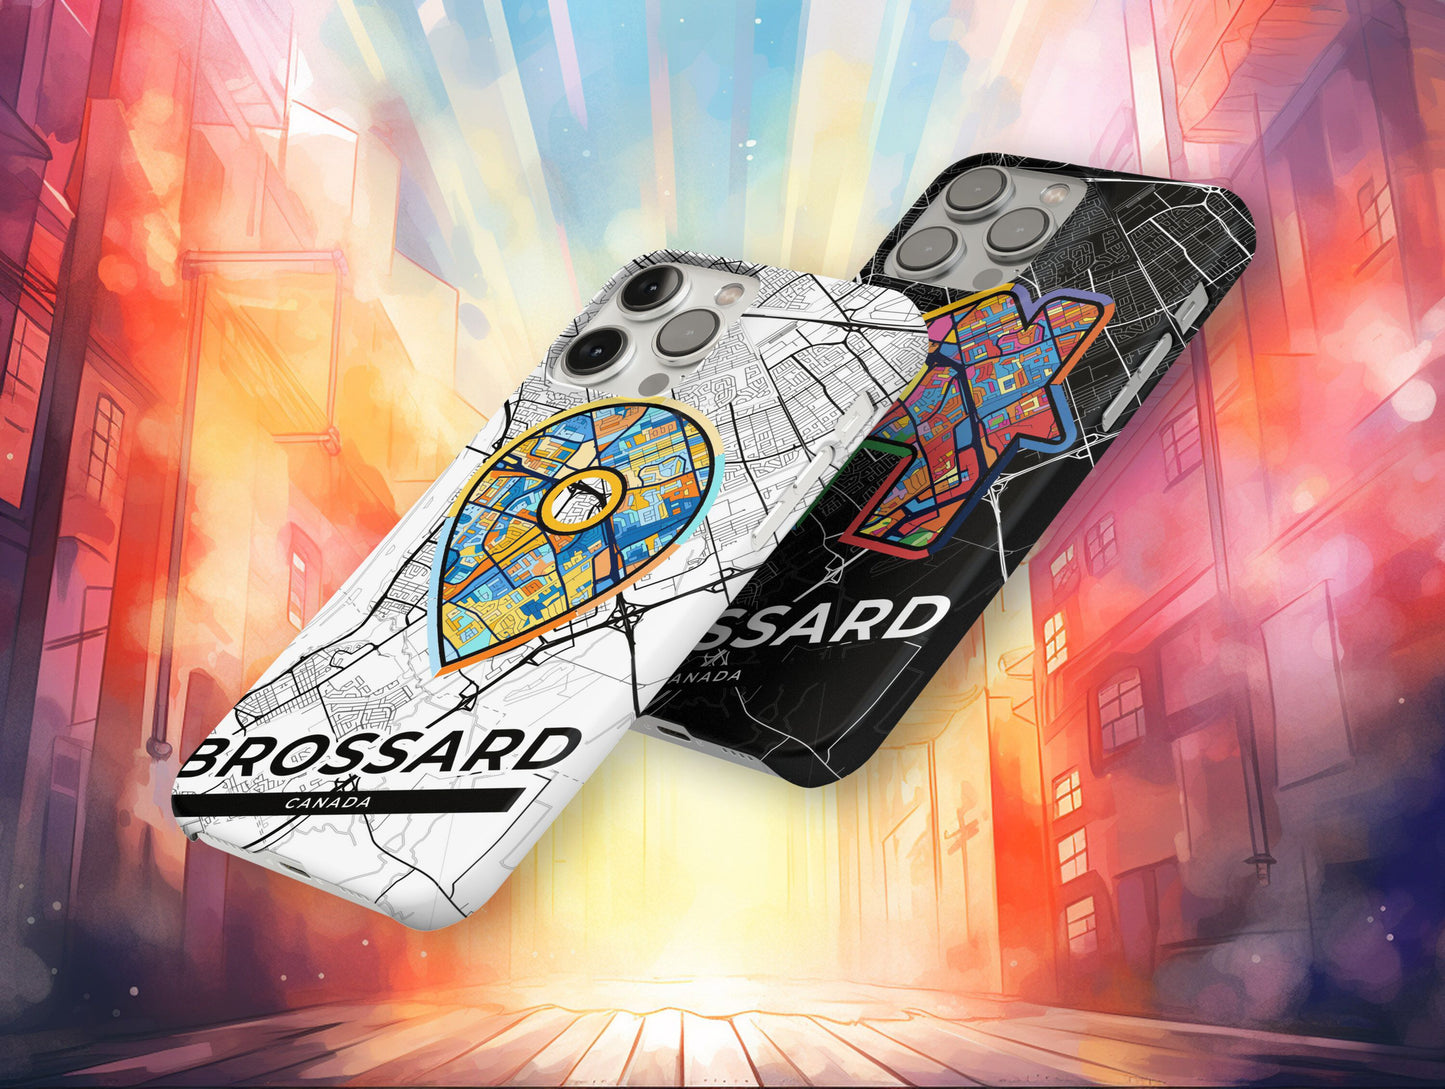 Brossard Canada slim phone case with colorful icon. Birthday, wedding or housewarming gift. Couple match cases.